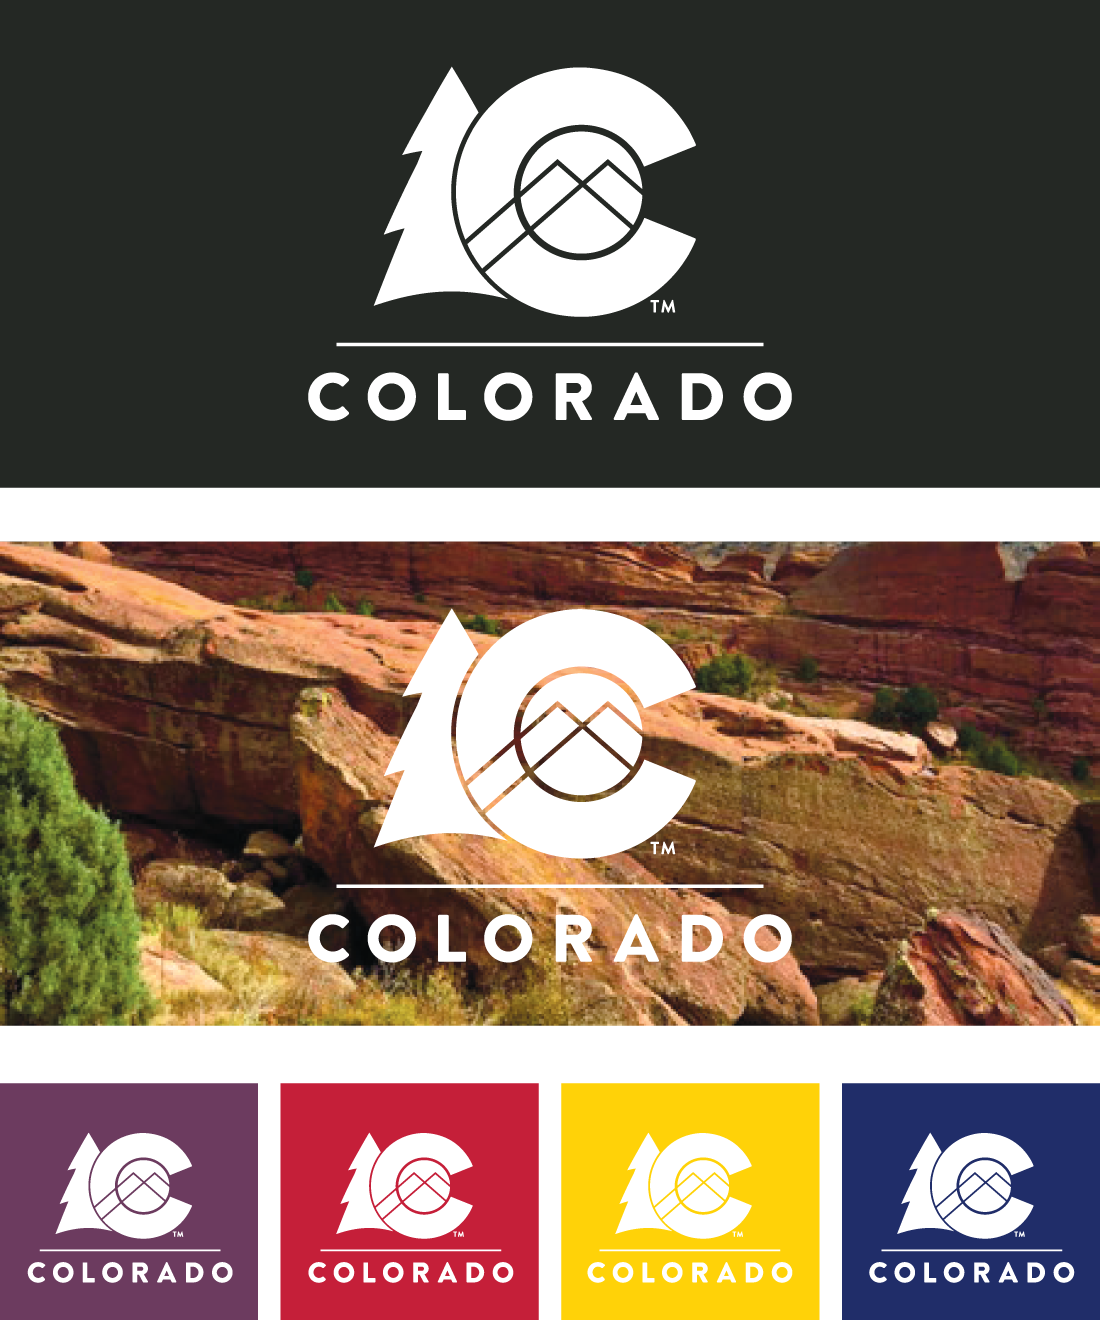 Multiple white or reverse Colorado logos on colored backgrounds